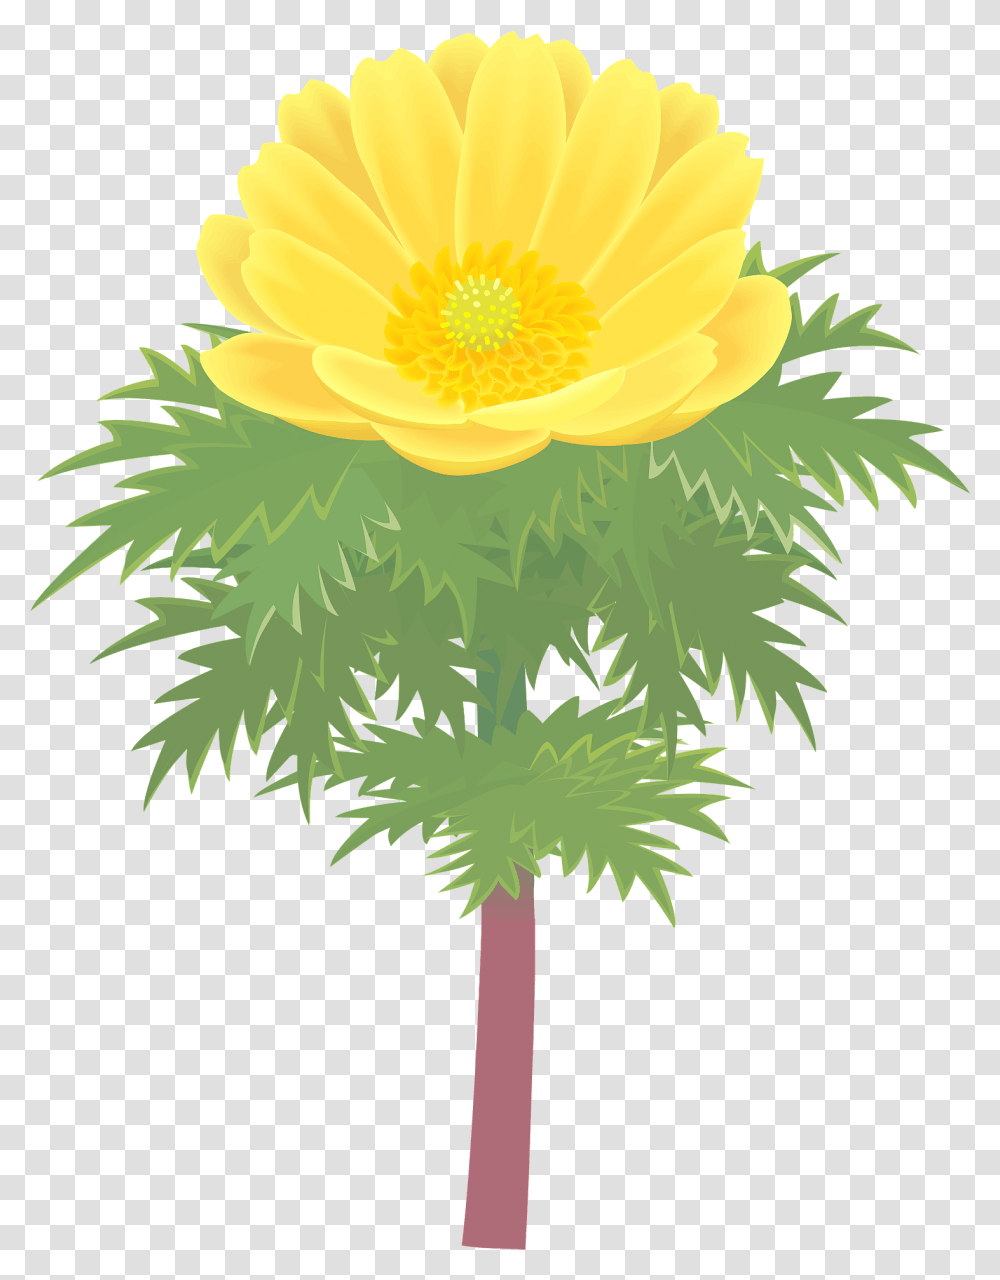 Amur Adonis Flower Pheasant's Eye Clipart Free Download English Marigold, Plant, Blossom, Anemone, Daisy Transparent Png